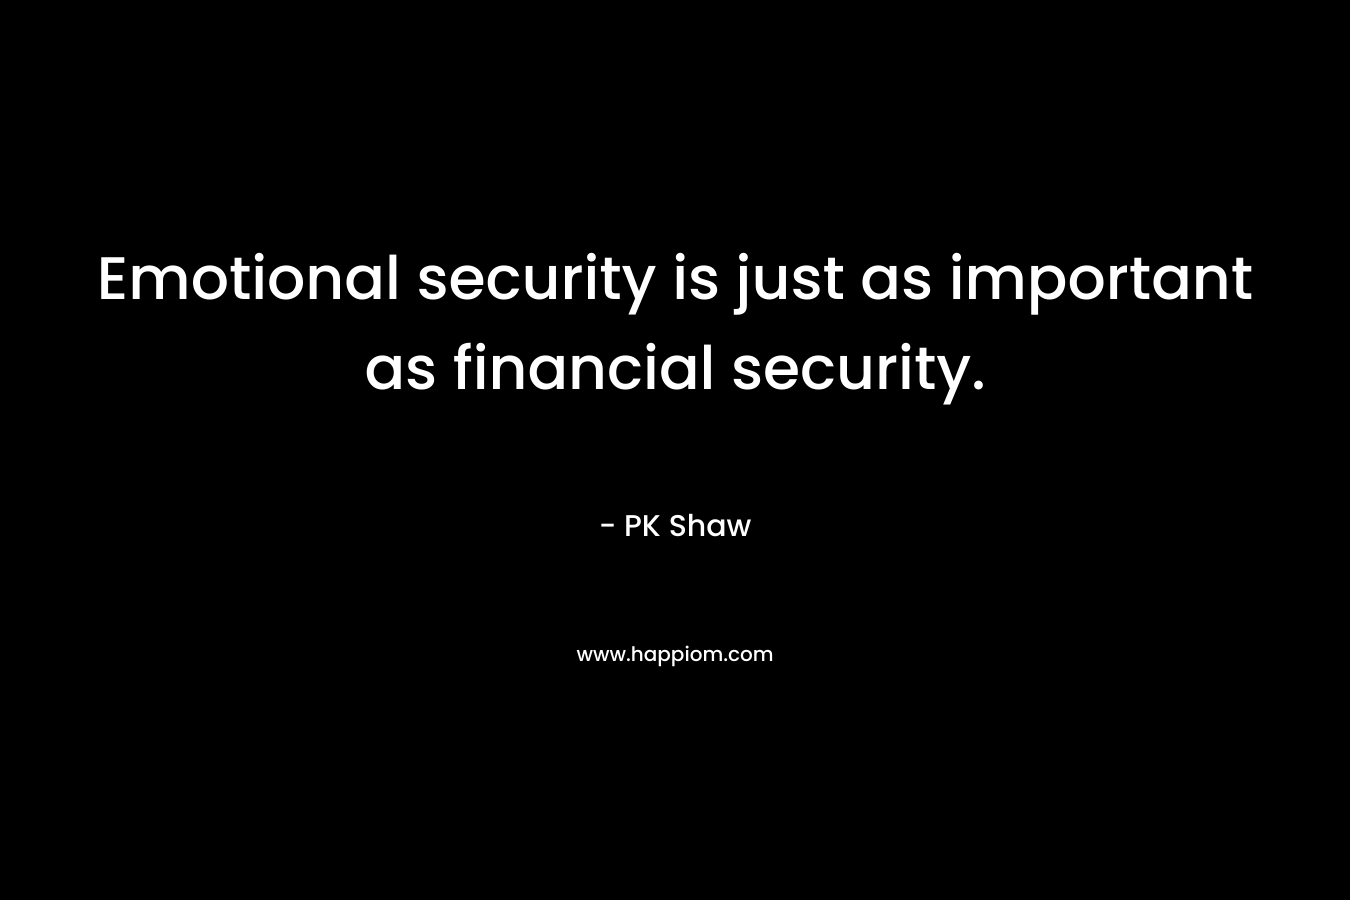 Emotional security is just as important as financial security. – PK Shaw